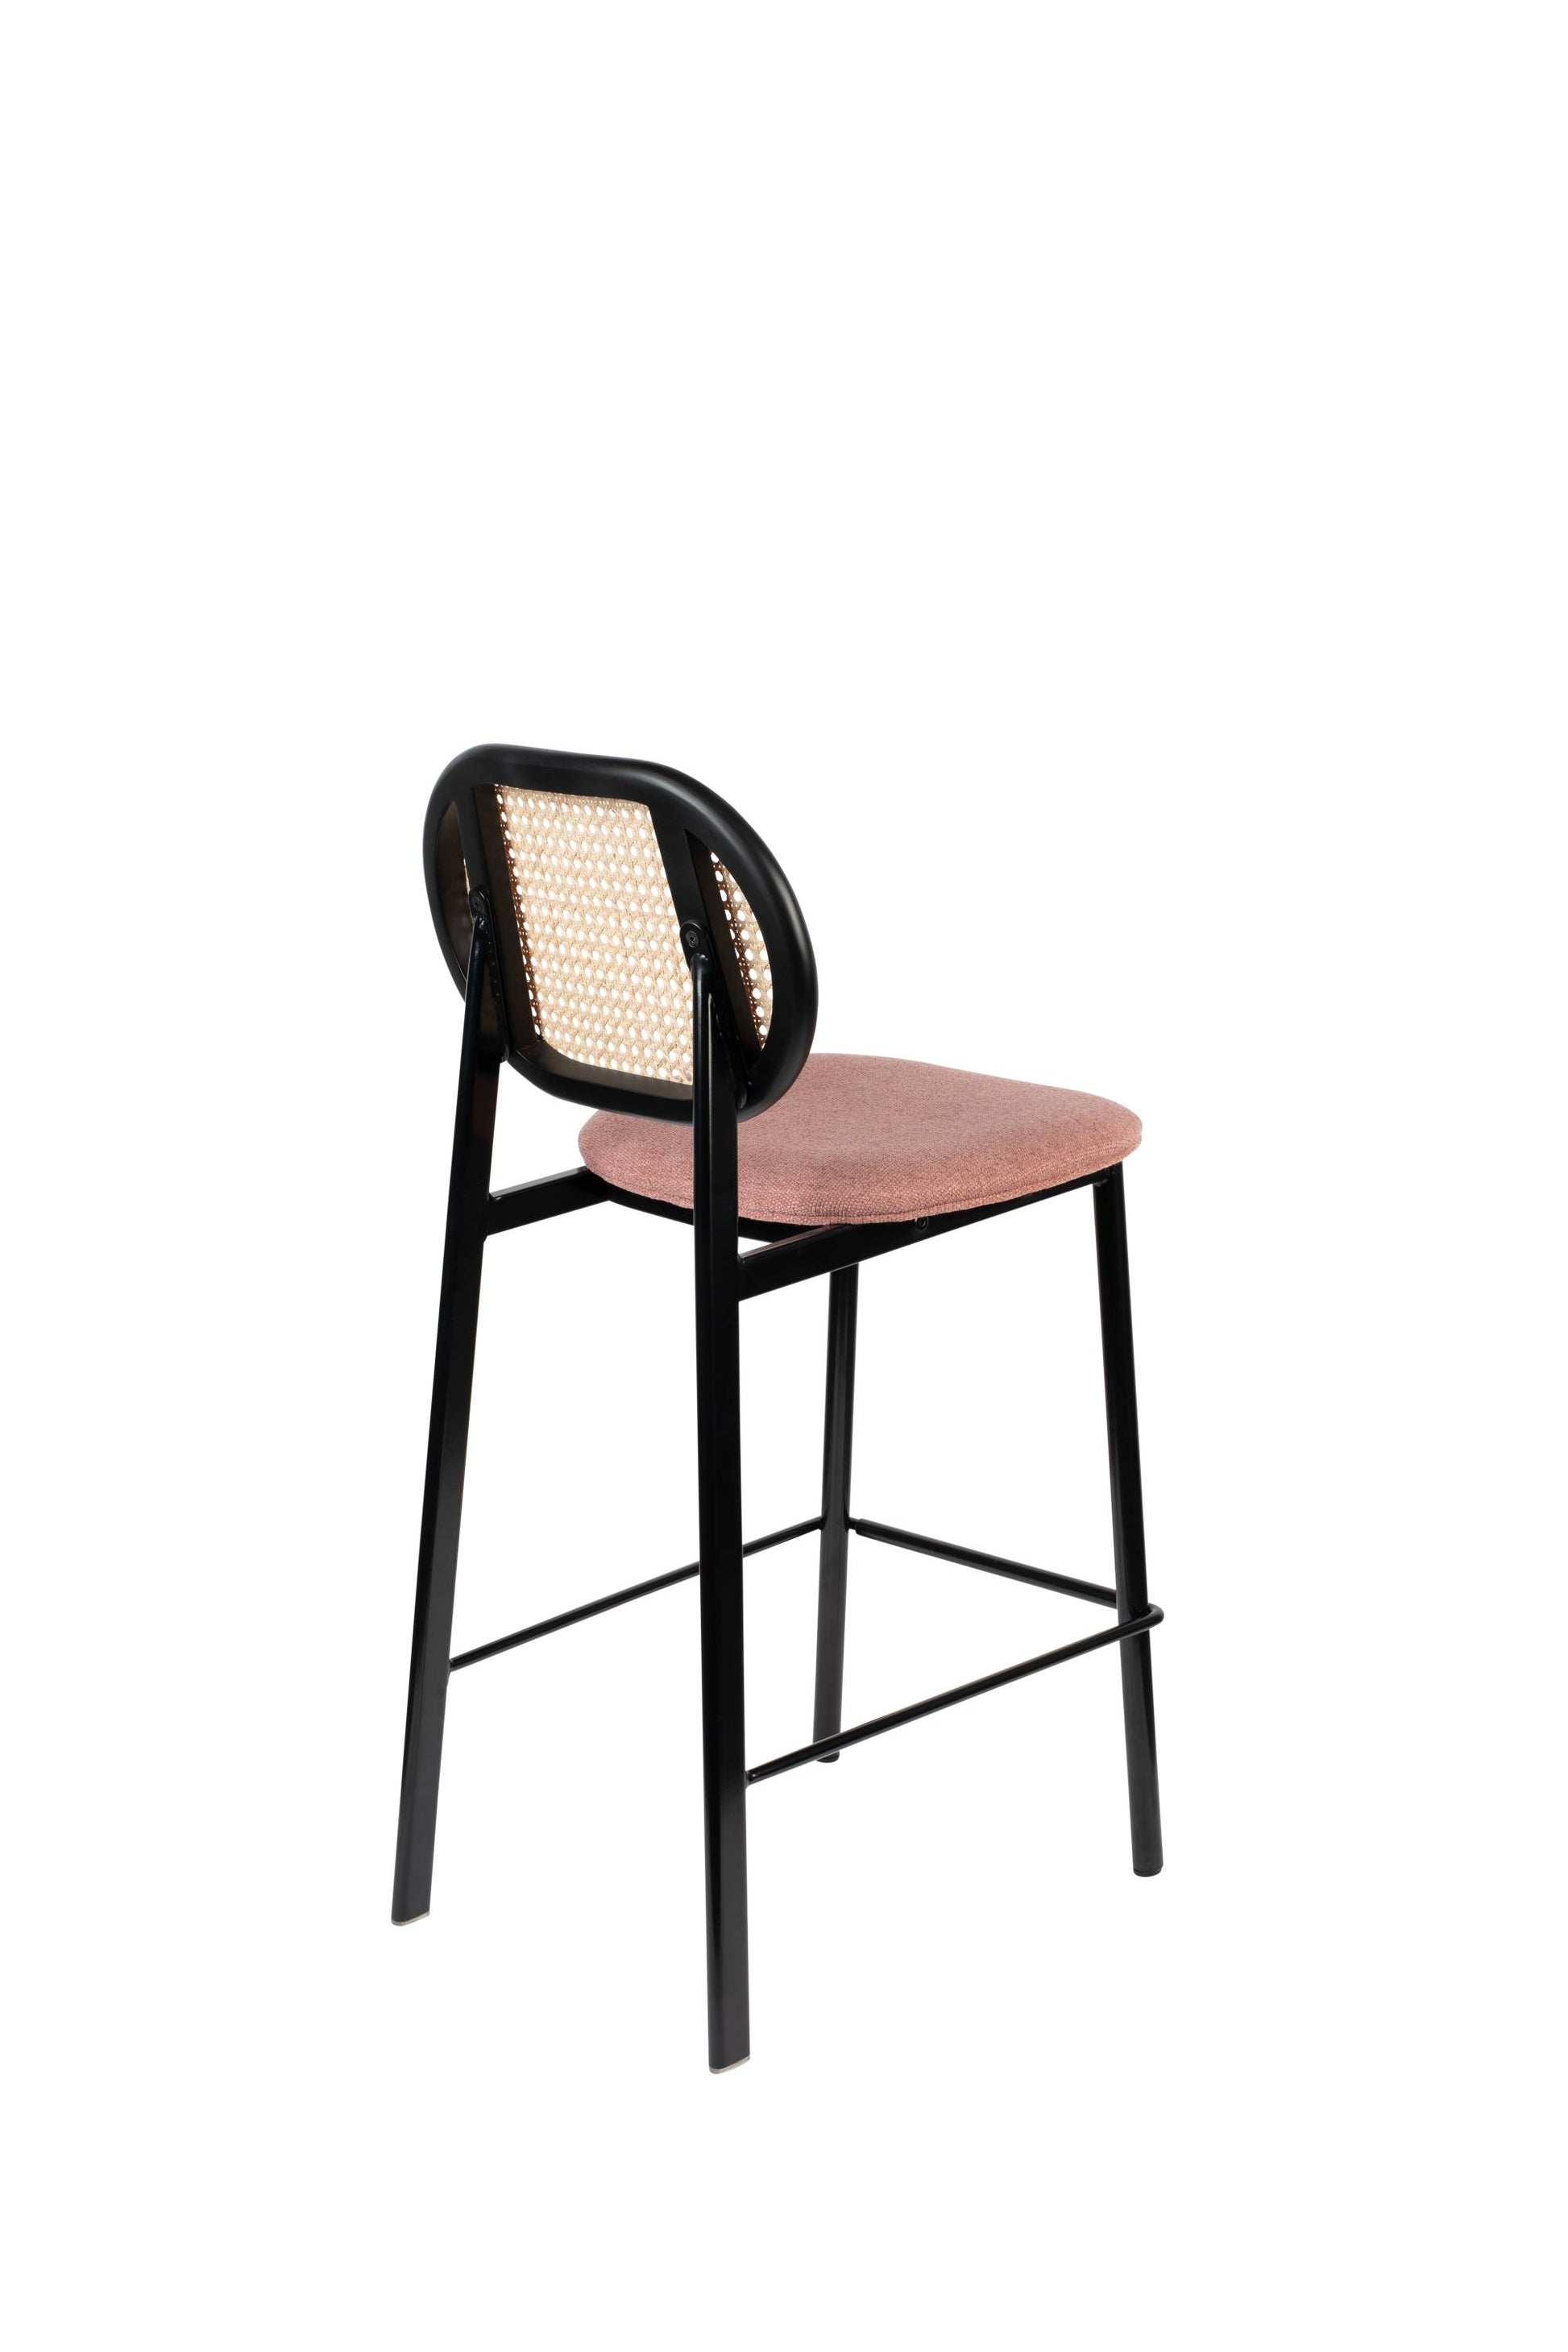 Zuiver | COUNTER STOOL SPIKE NATURAL/PINK Default Title